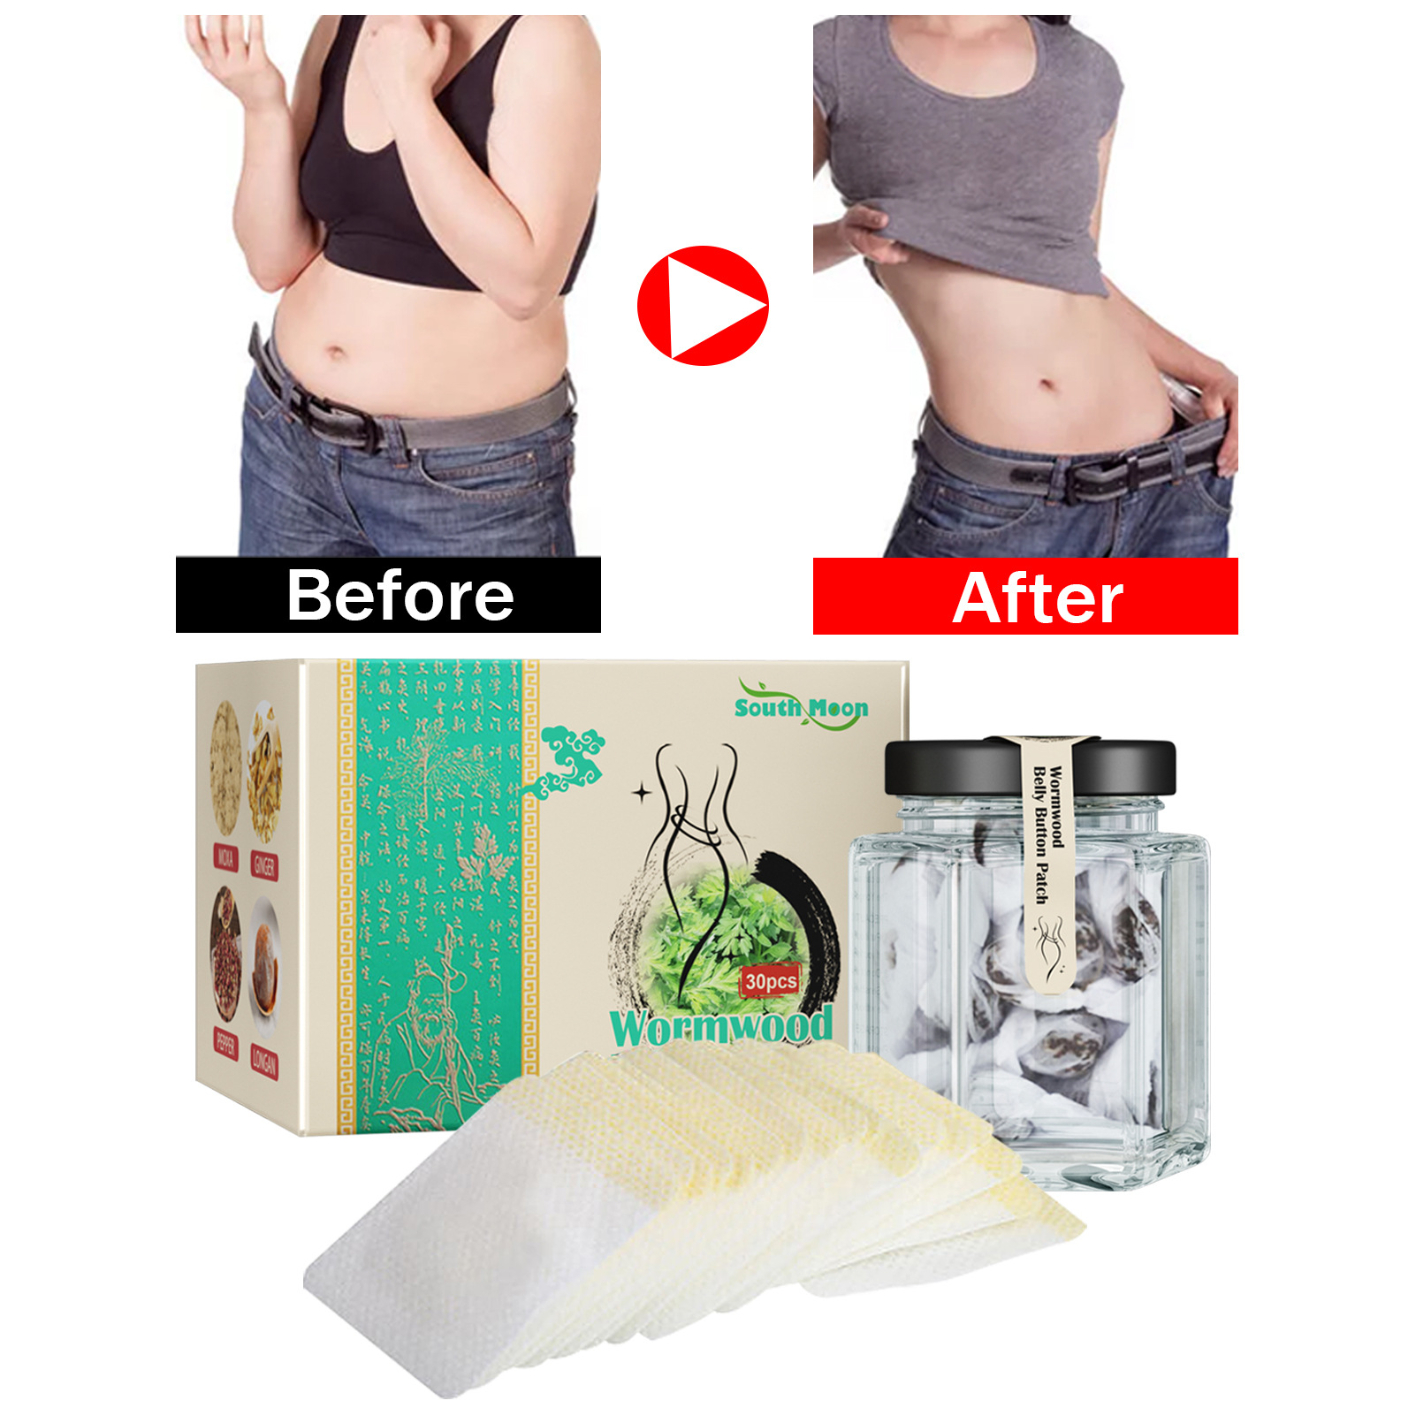 Mugwort Belly Patch, Natural Wormwood Essence Pills and Belly Sticker (30Pcs/Box), Moxibustion Belly Button Patch for Men and Women